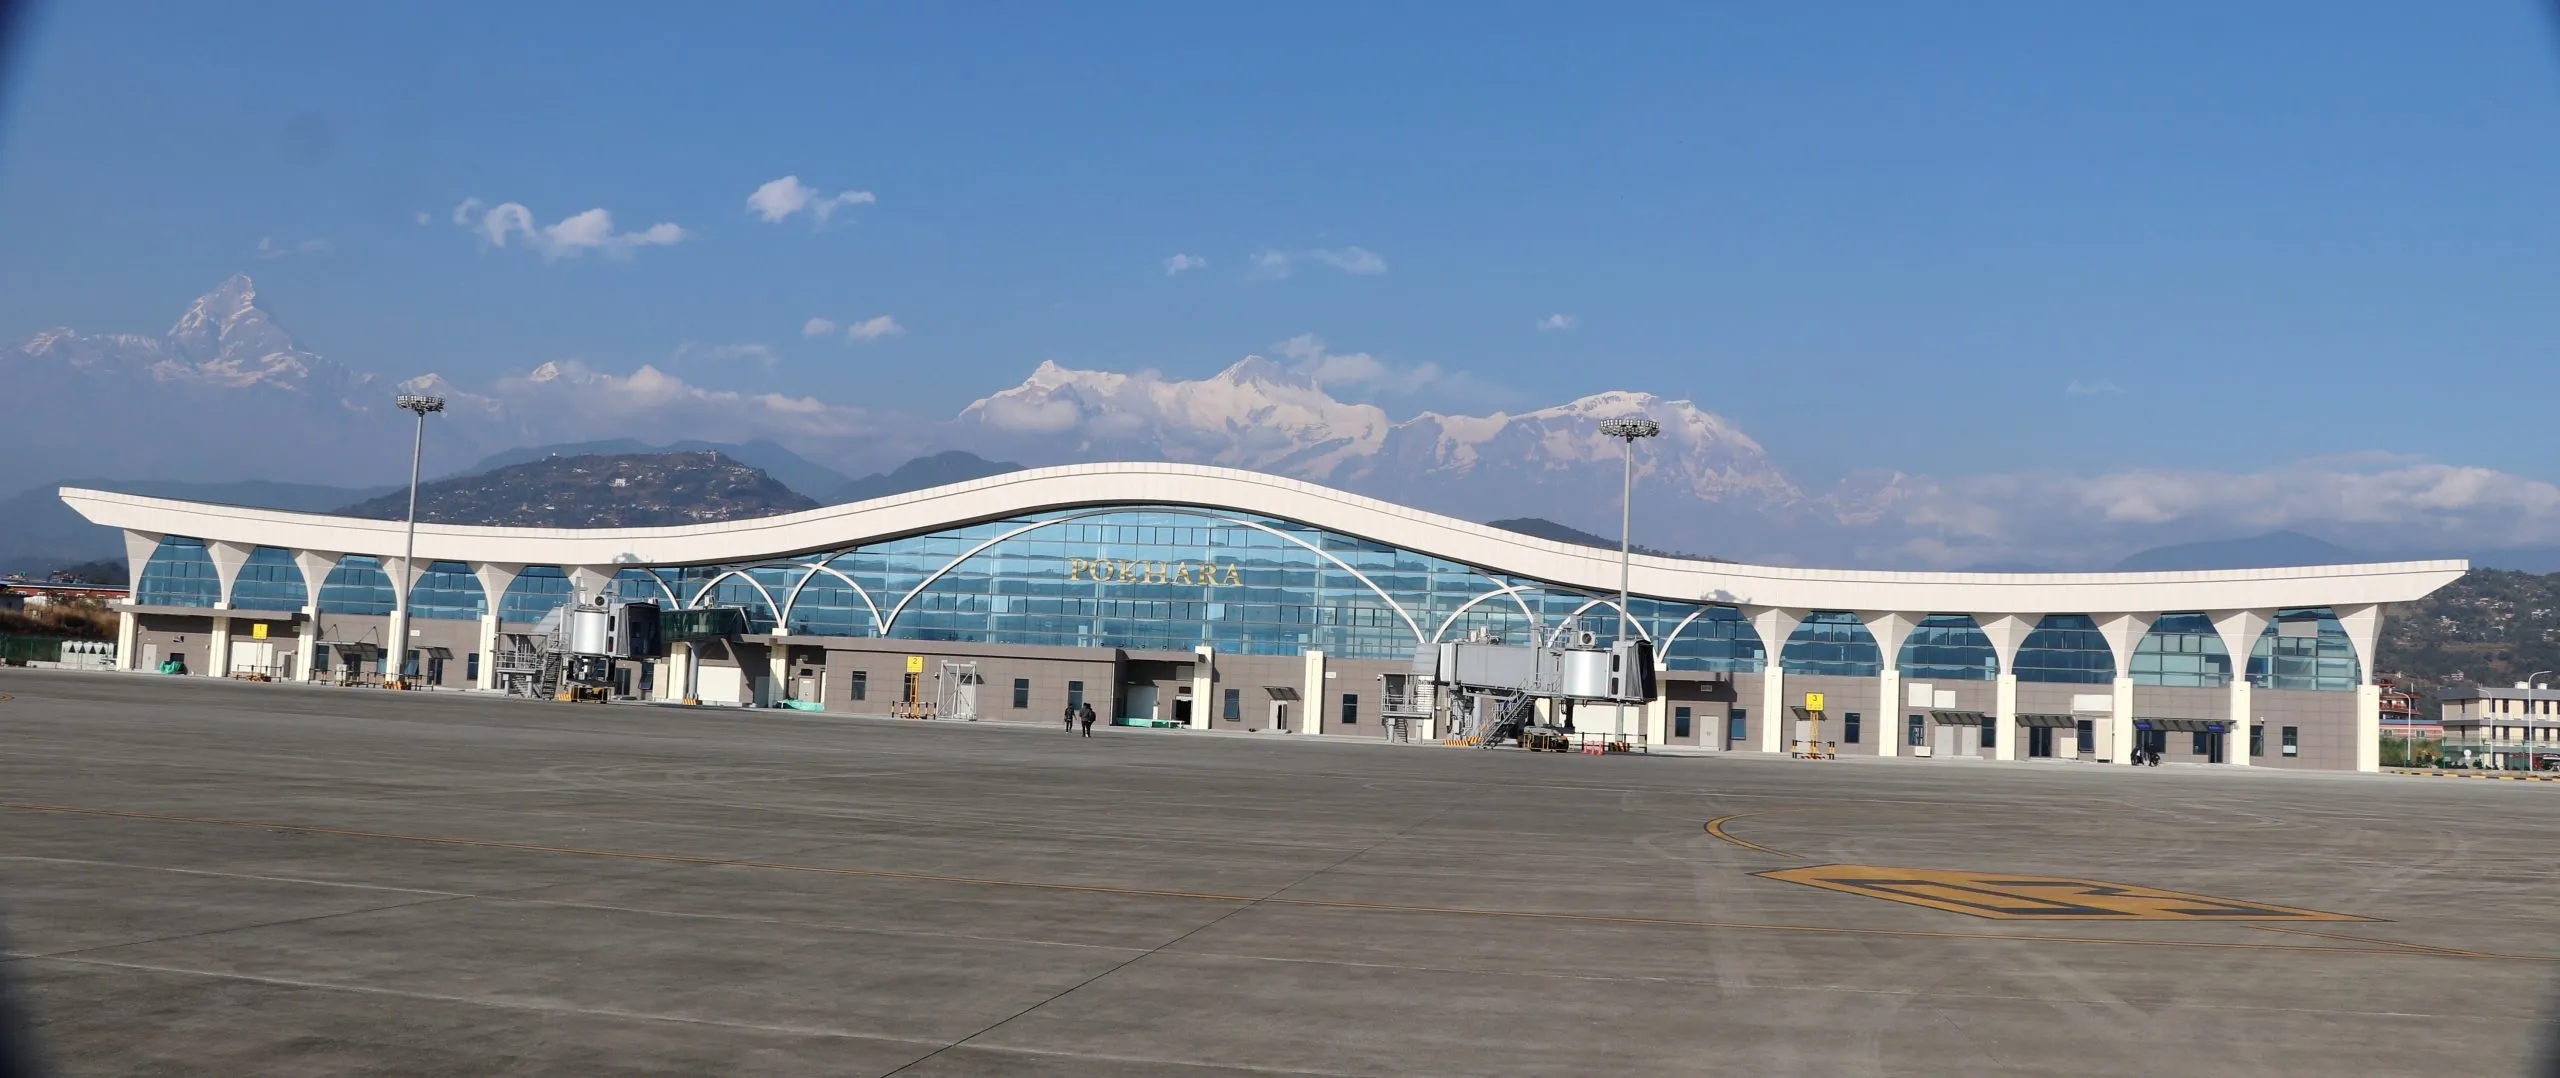 pokhara_airport1-scaled